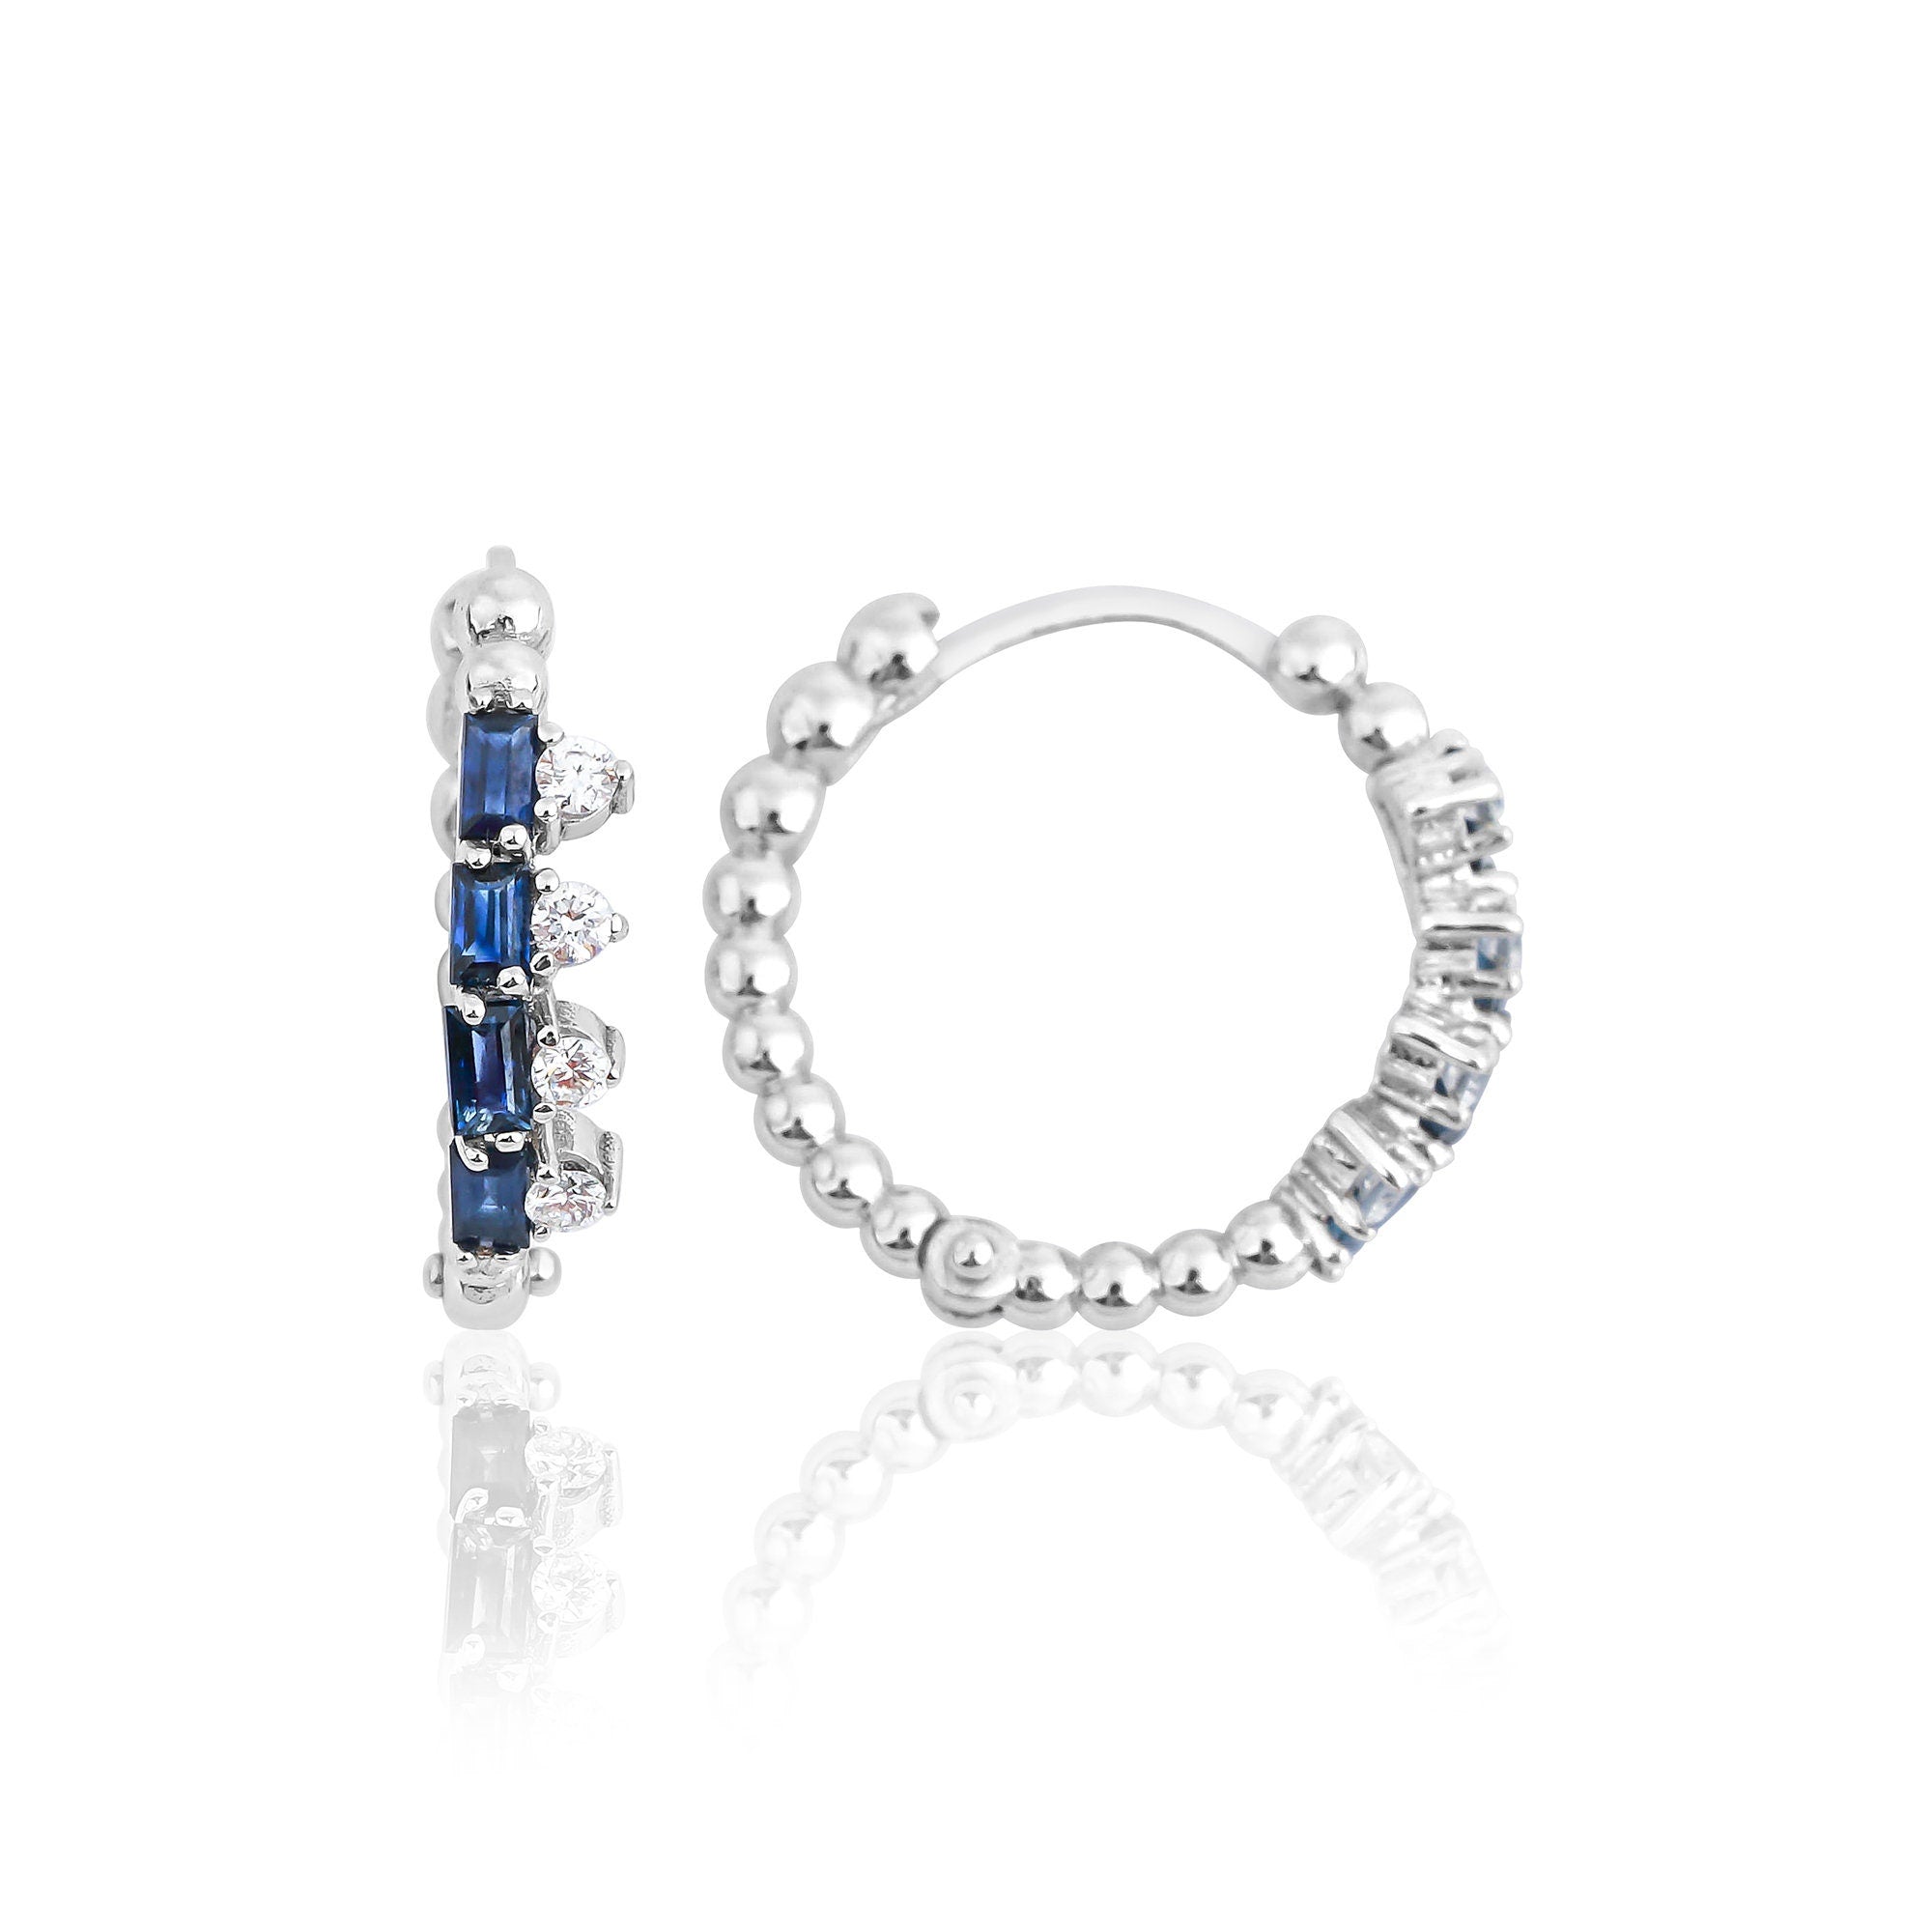 Baguette Cut Sapphire and Round Cut Diamond Hoop Earrings in 14K White Gold